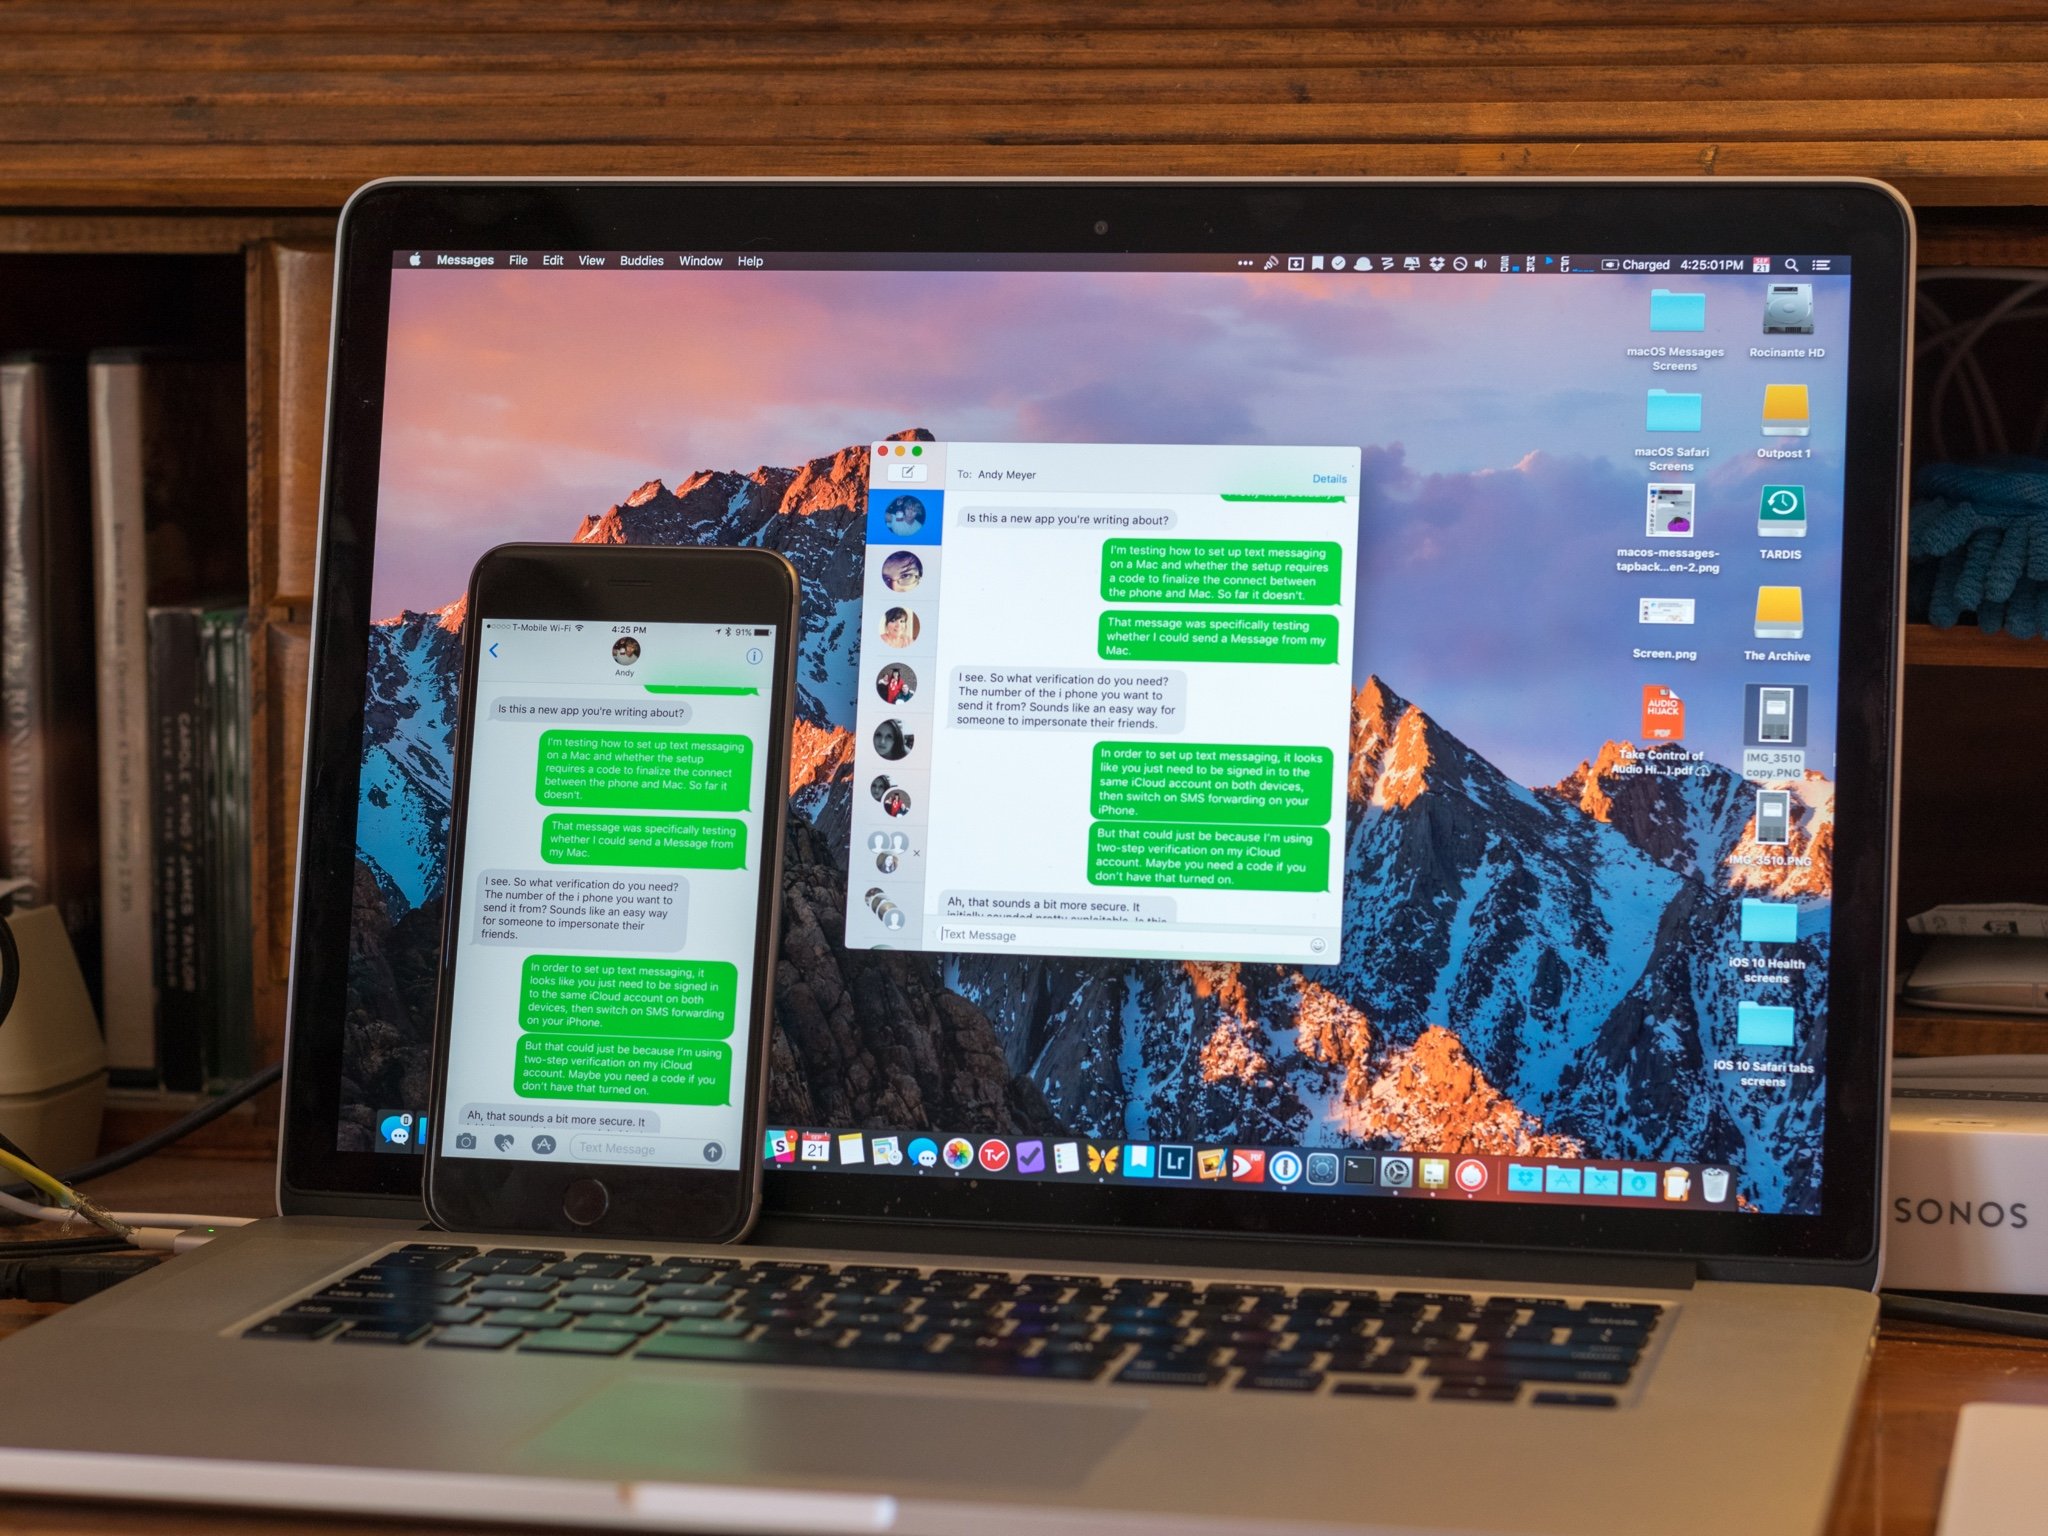 How to get text messages on your Mac